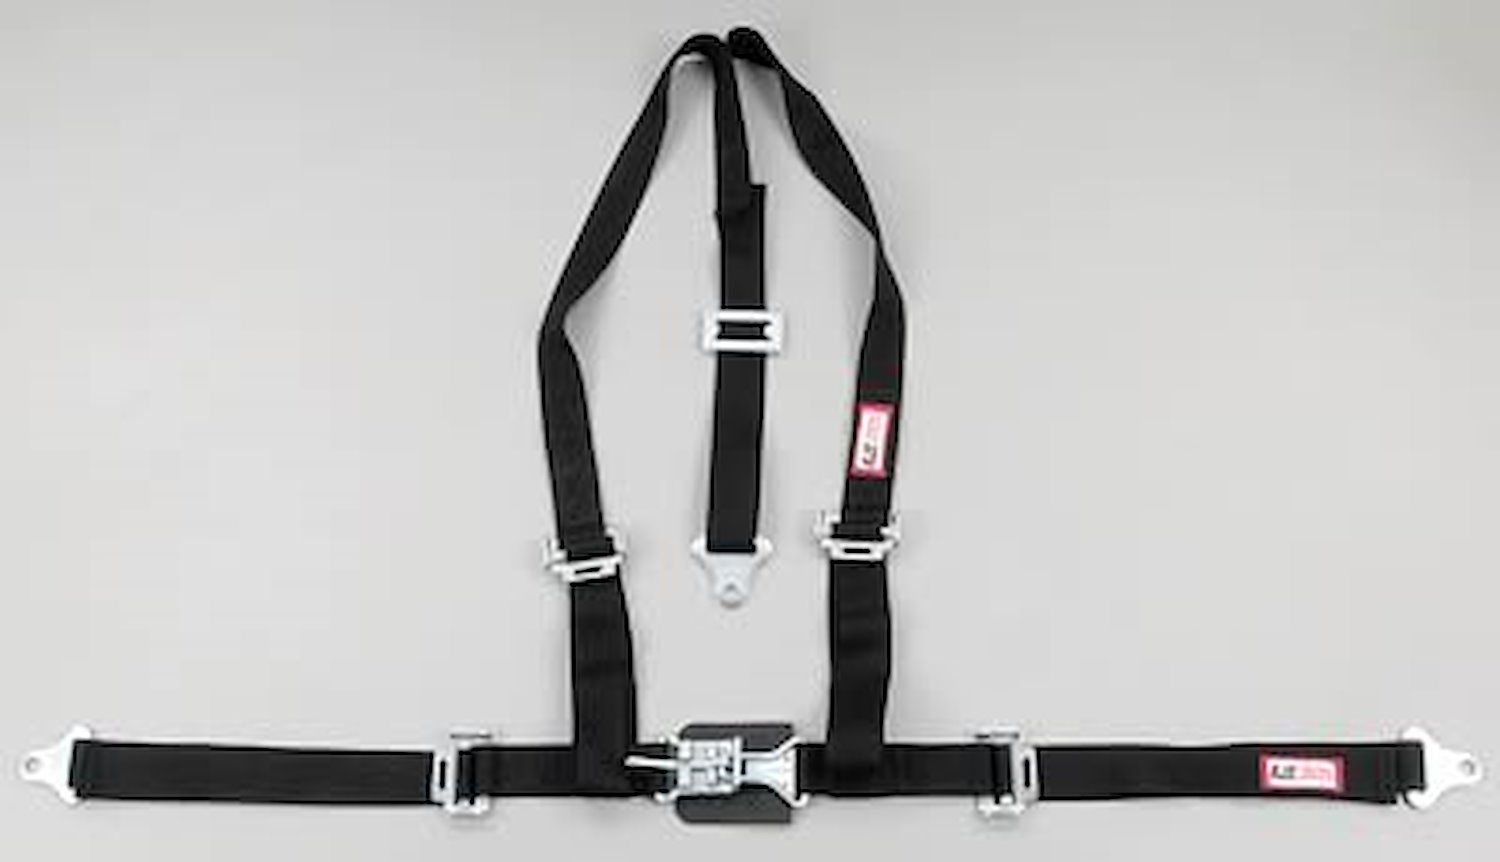 NON-SFI L&L HARNESS 2 PULL DOWN Lap Belt w/adjuster 2 S.H. V ROLL BAR Mount ALL WRAP ENDS RED